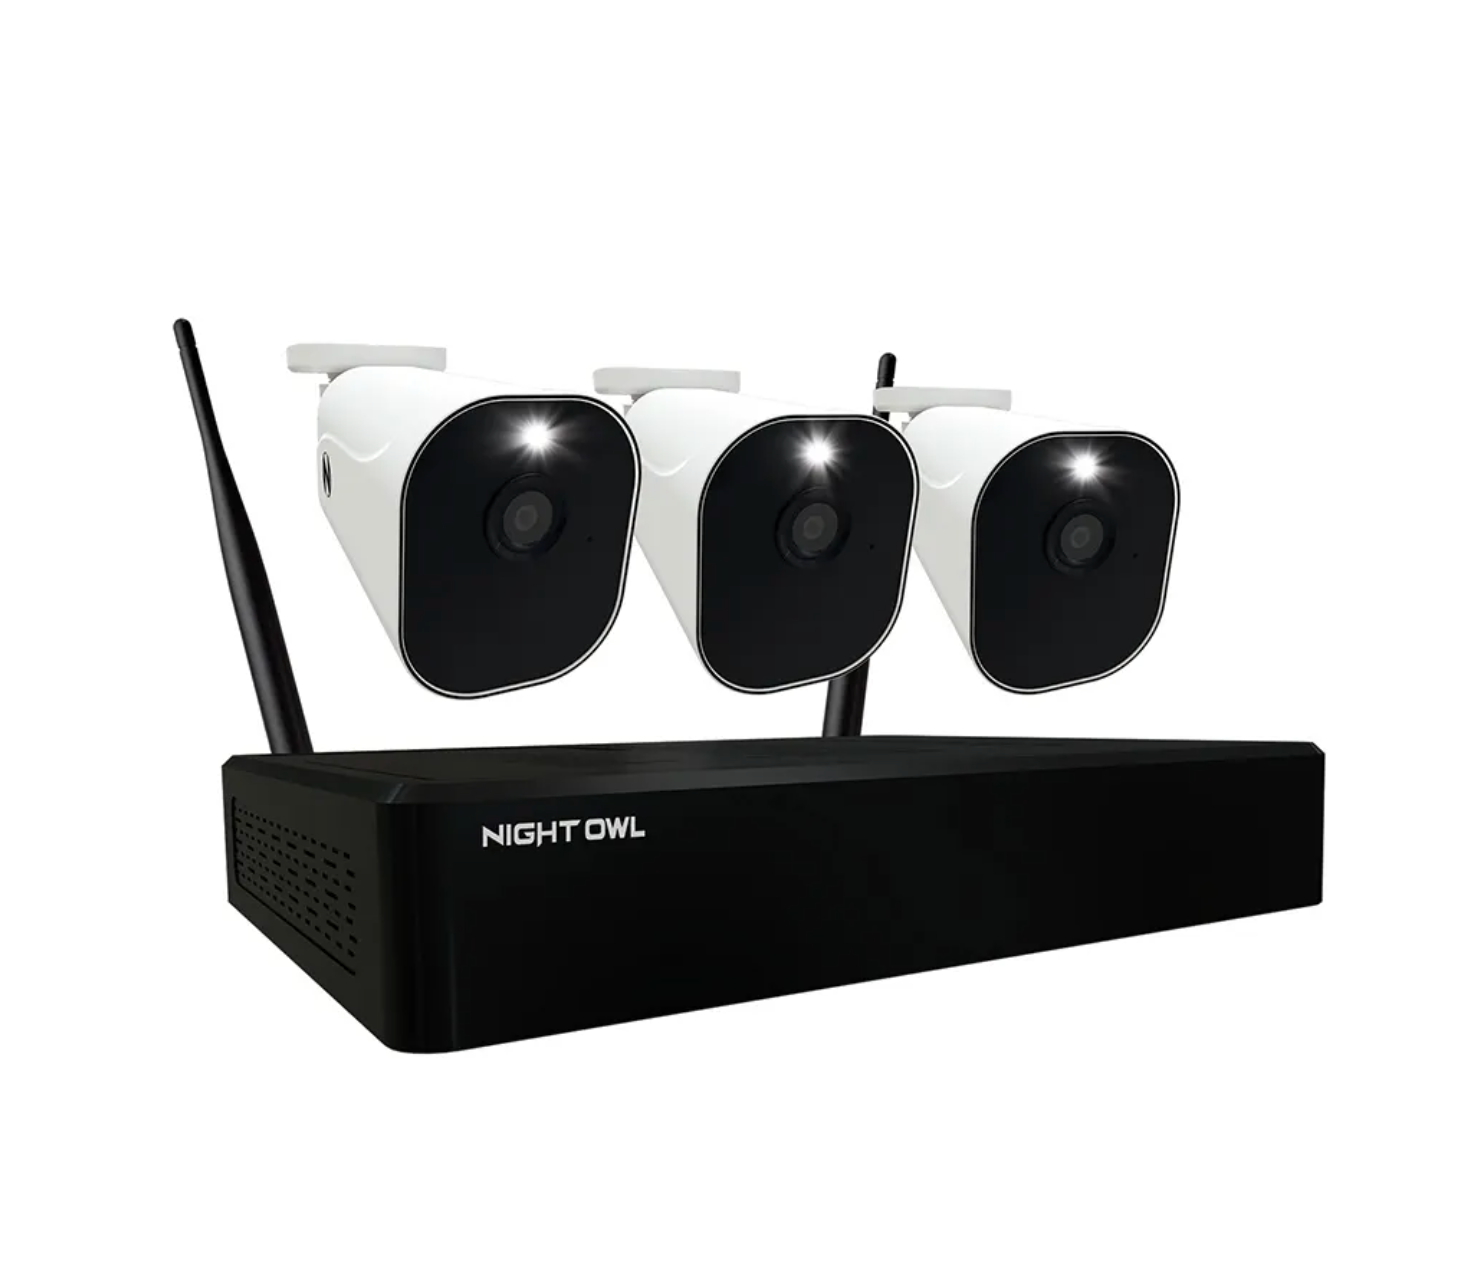 Powered Wi-Fi Security & Camera Systems